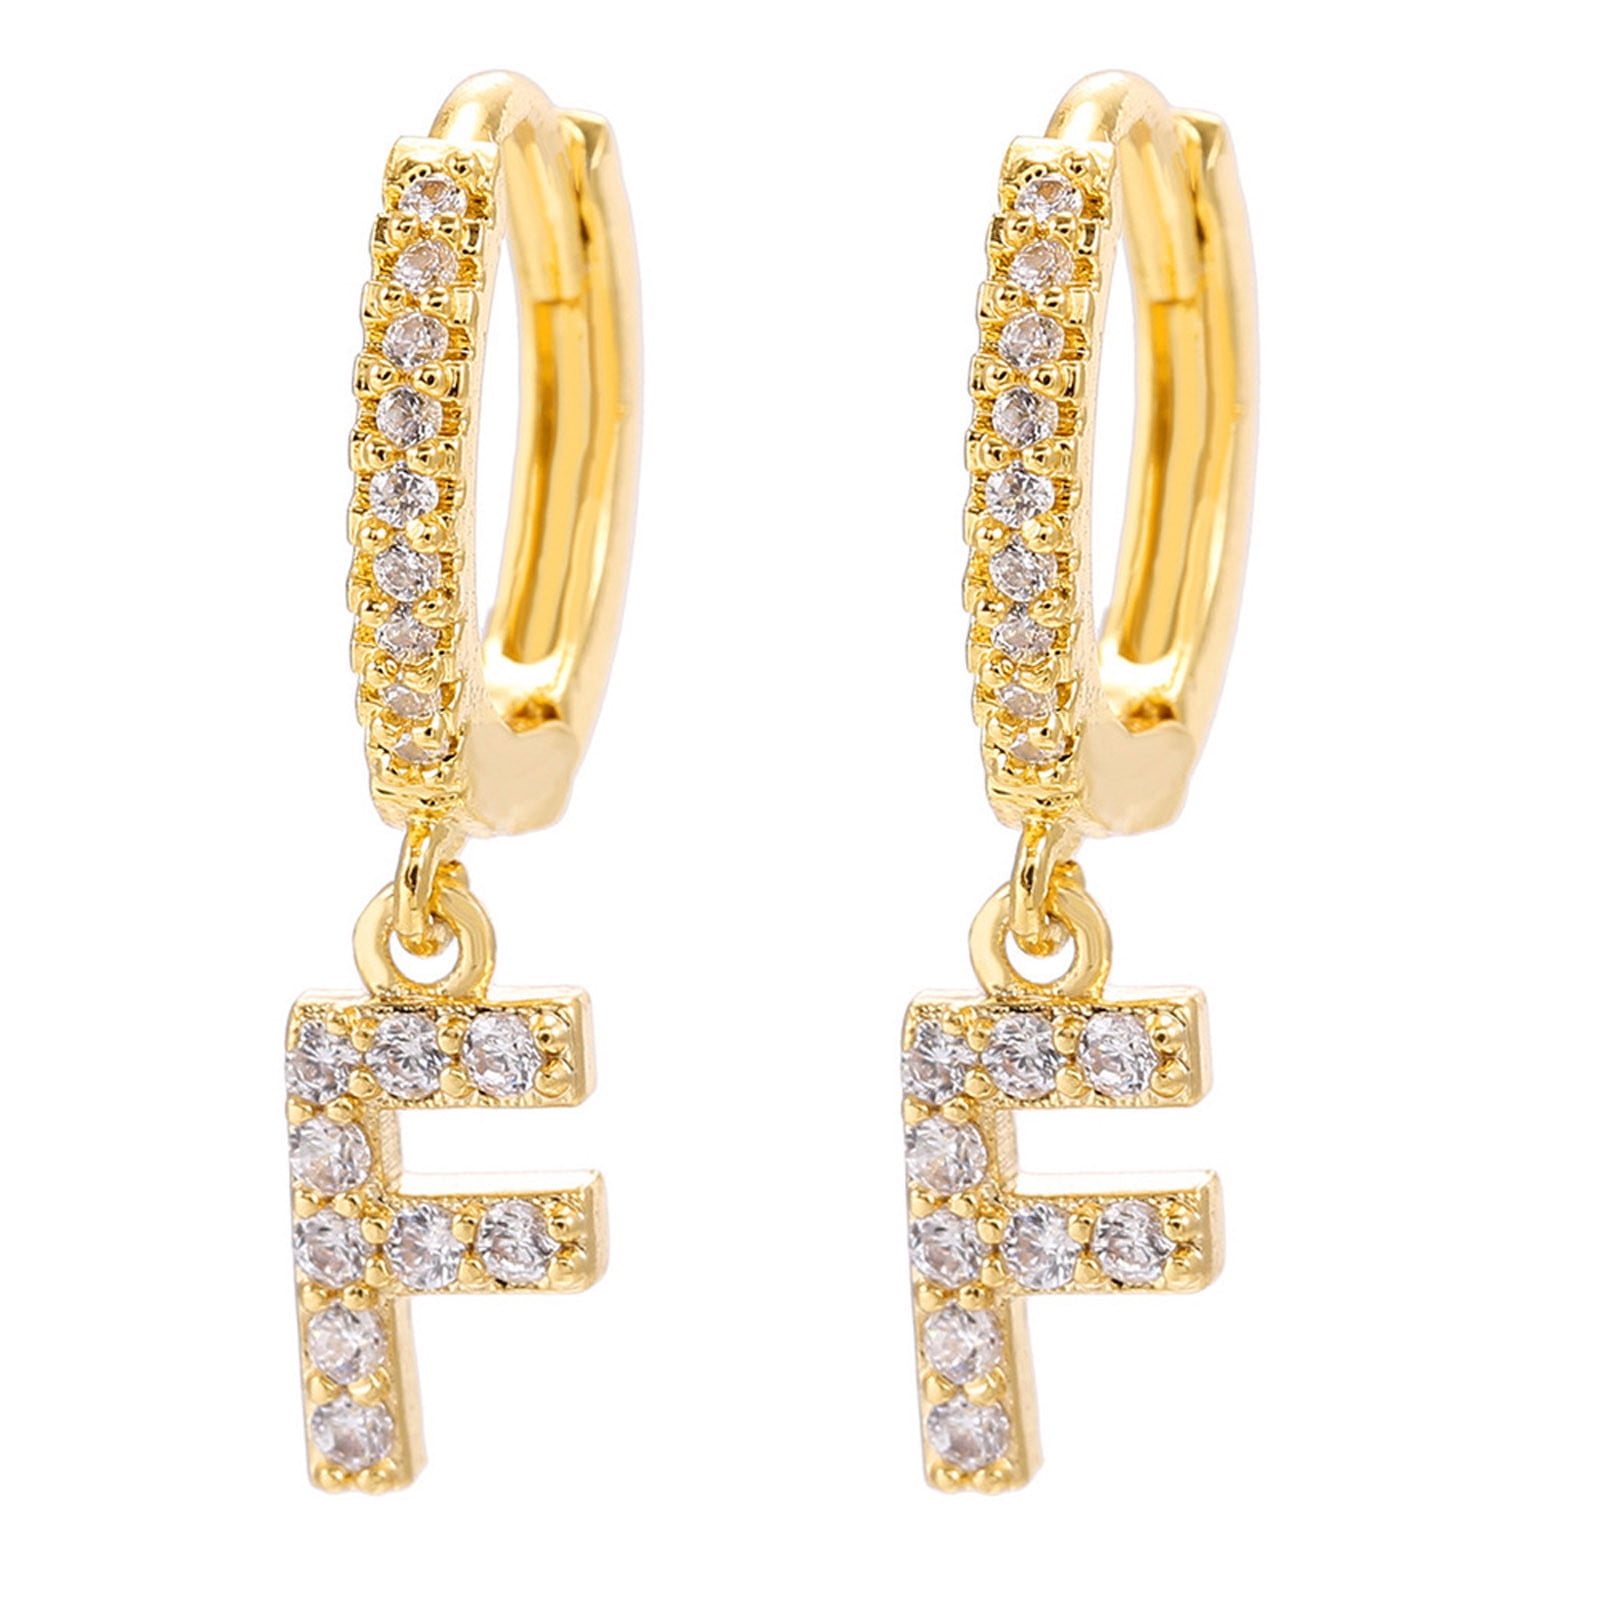 Kiplyki Wholesale Dainty Gold Plated Initial Hoop Earrings Letter Alphabet Dangle Fashion Sparkly Rhinestone Pendant Drop For Women Valent b93aa661 9100 4ad9 b6bf 7108b4ebcbc1.631b4d27ca9d878690a19ace0aa190ef